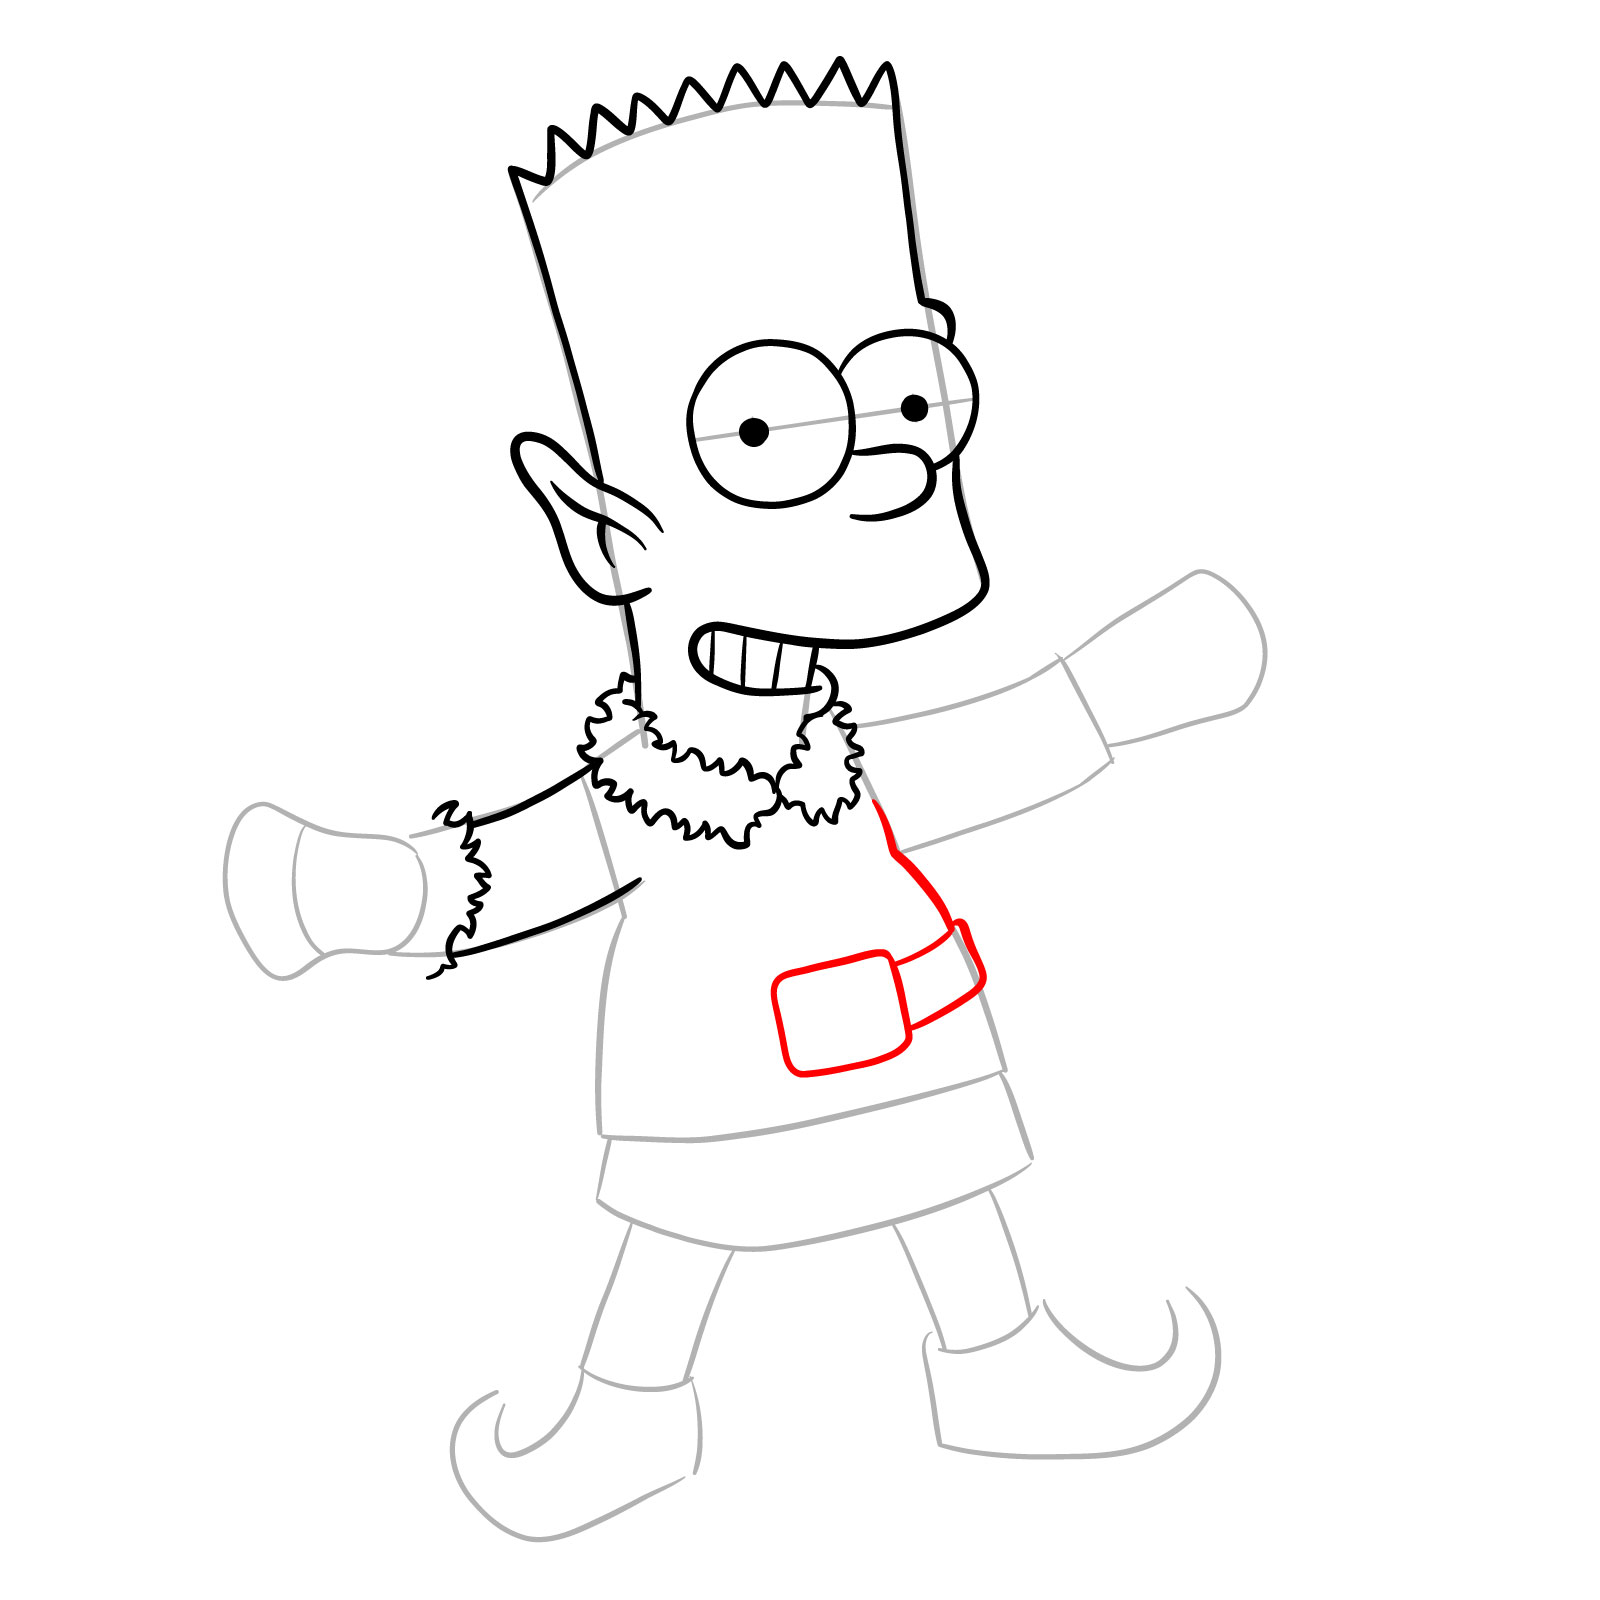 How to draw Bart Simpson as a Christmas Elf - step 16